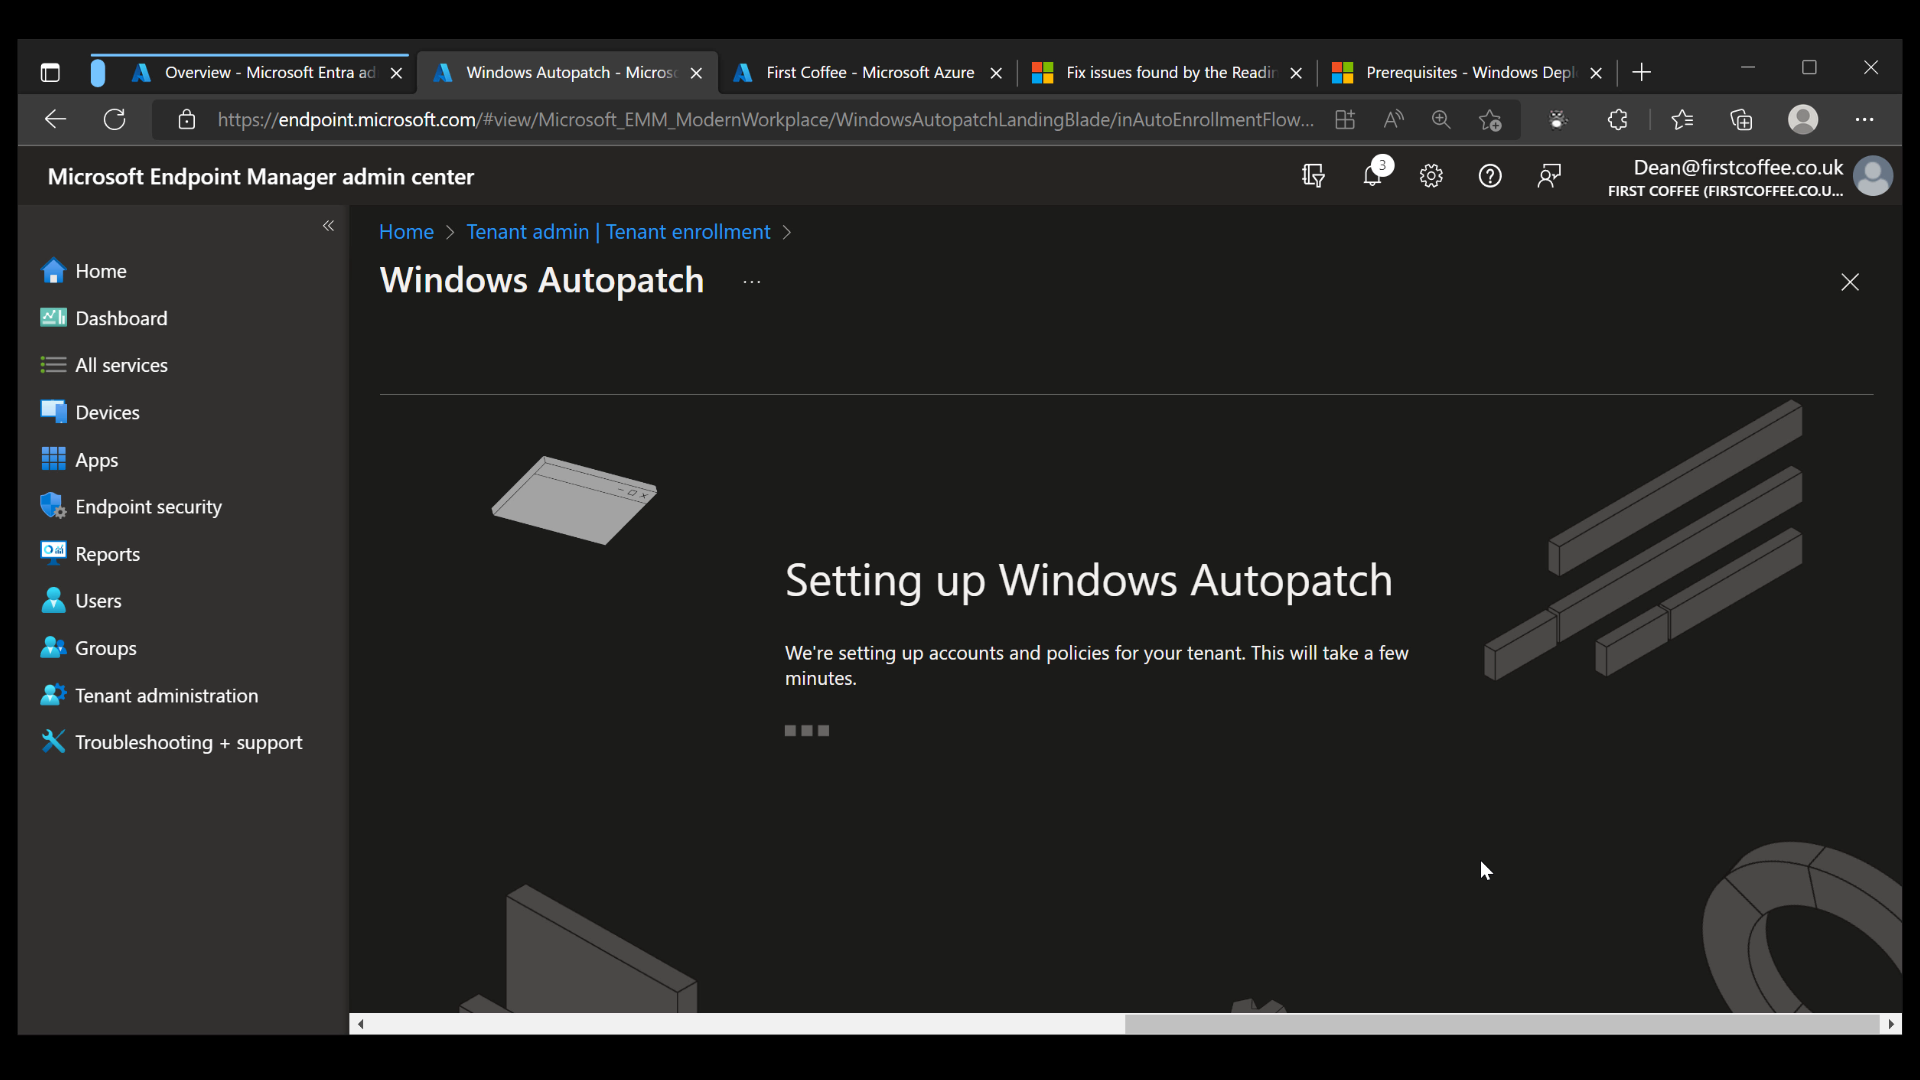 Windows Autopatch starts setting up accounts and policies for your tenan